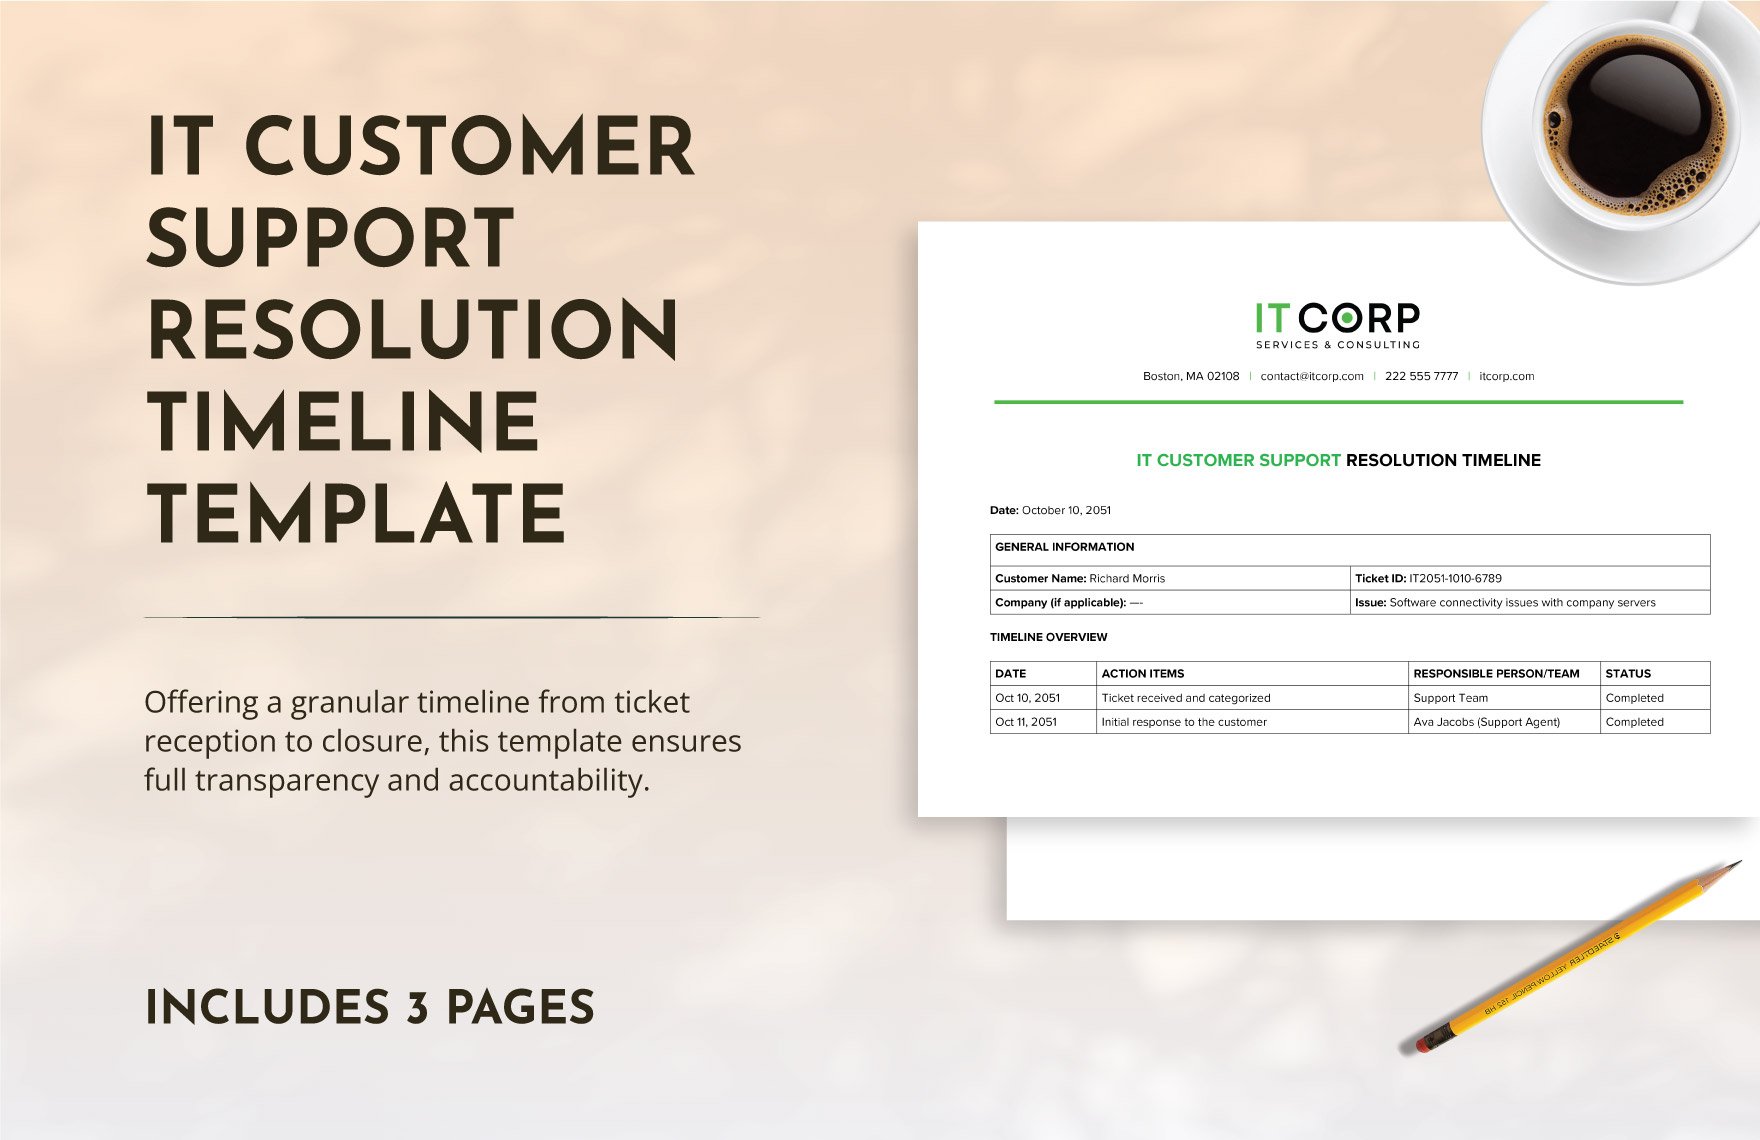 IT Customer Support Resolution Timeline Template